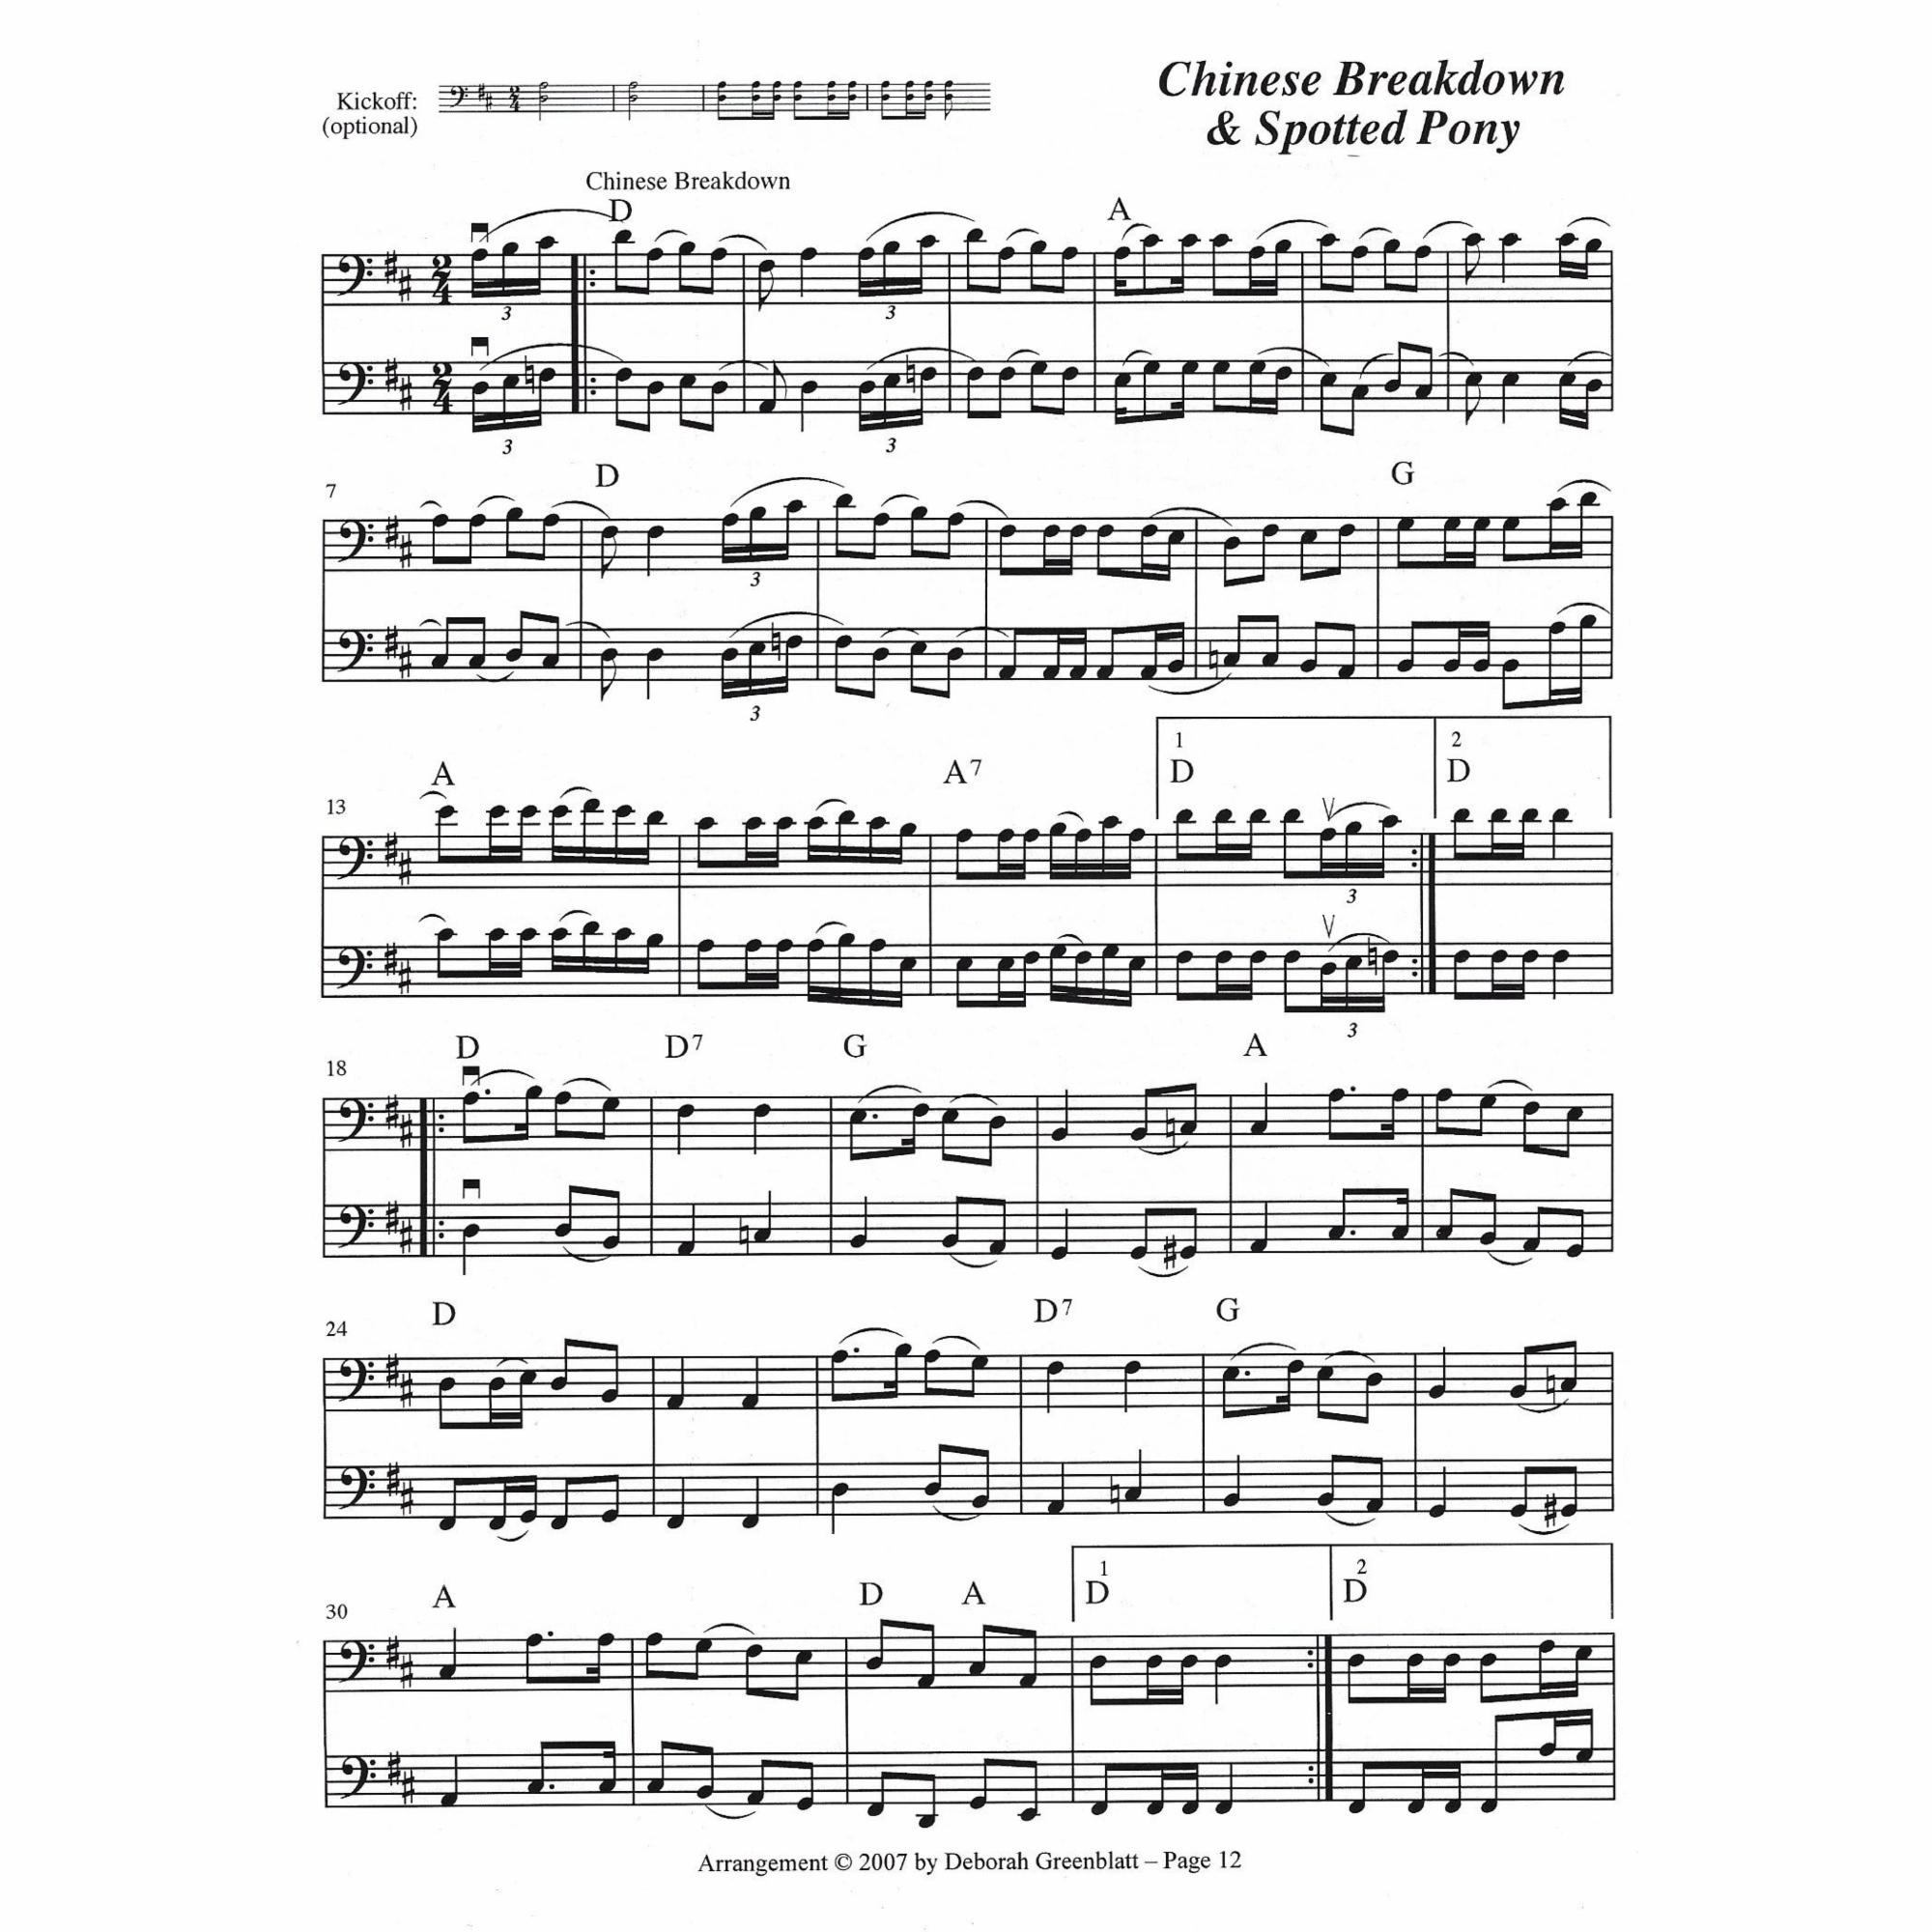 Sample: Two Cellos (Pg. 12)